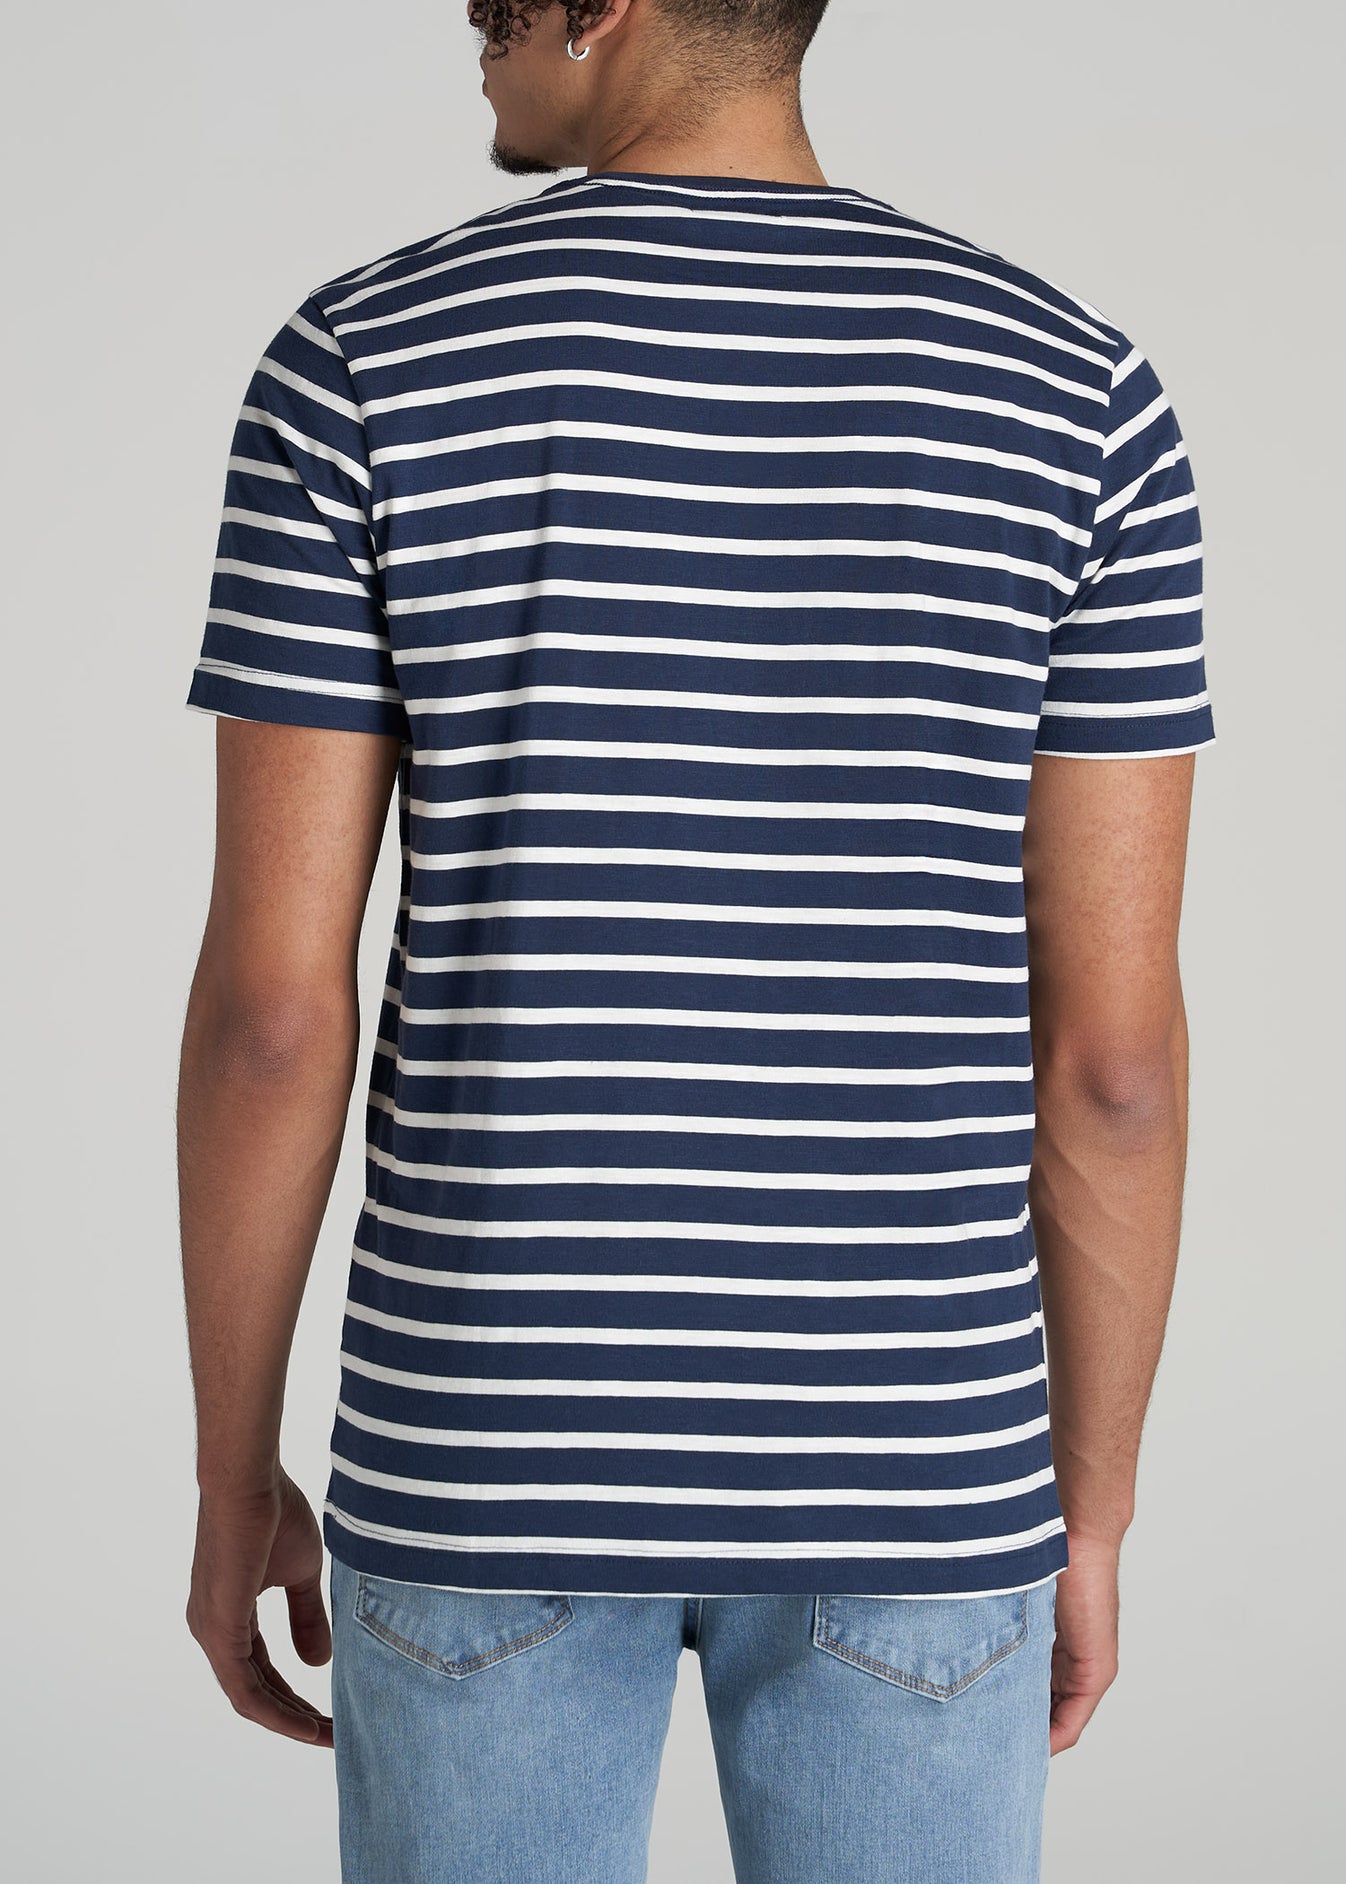 Striped T Shirt Mens Tall Navy And White Striped Tee American Tall